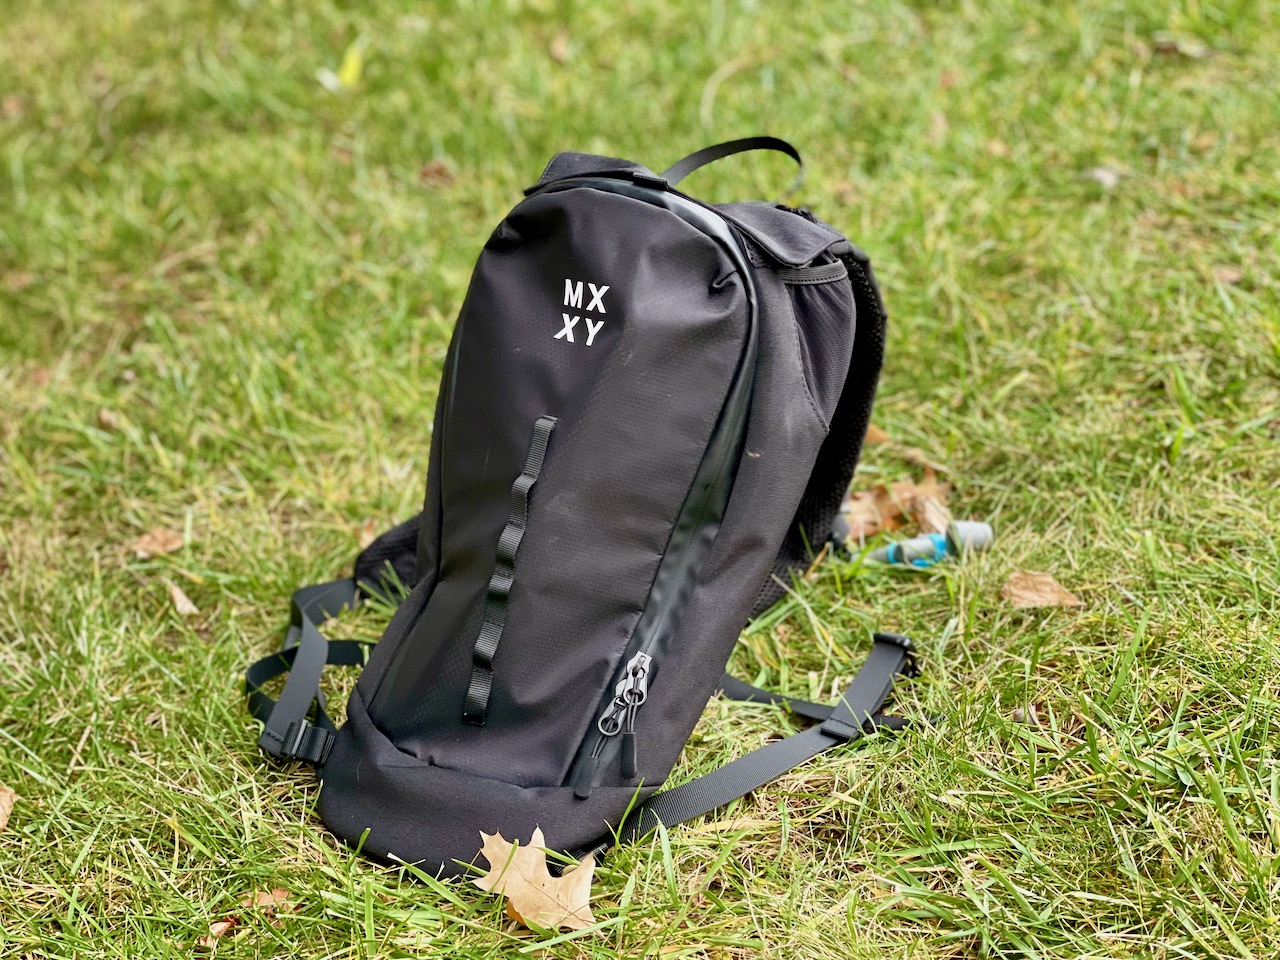 MXXY hydration pack full